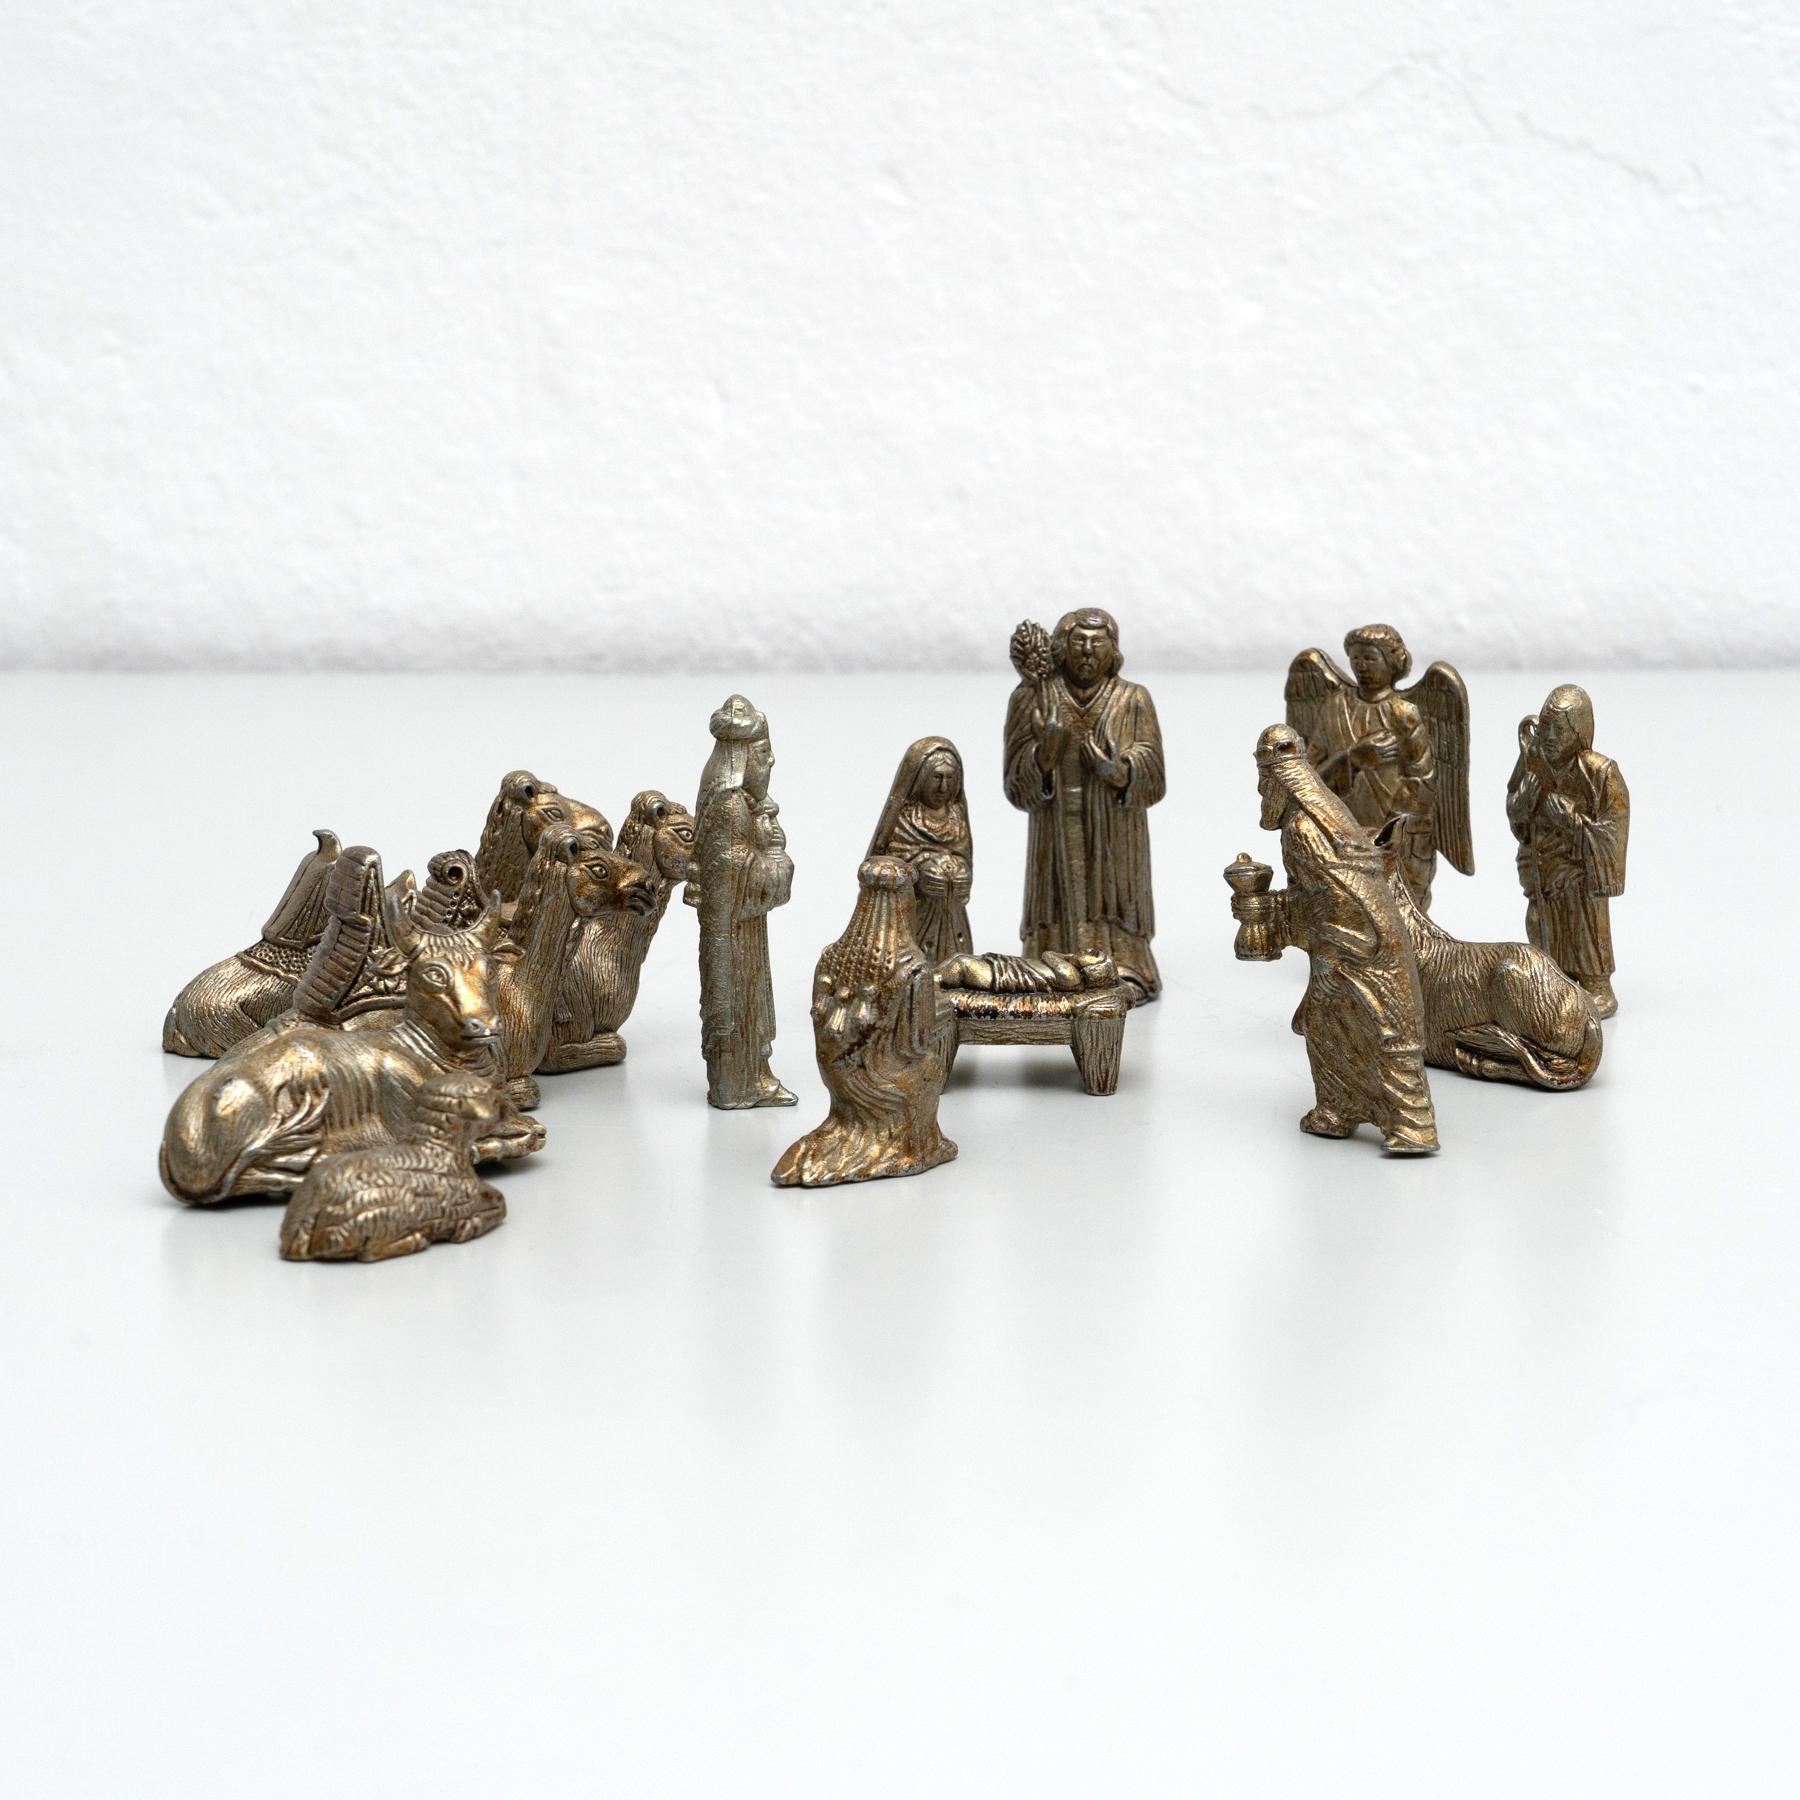 Set of 14 traditional Spanish Christmas figures. Made out of metal.

Manufactured in Spain, circa 1950.

In original condition, with minor wear consistent with age and use, preserving a beautiful patina.

Material:
Metal.
 